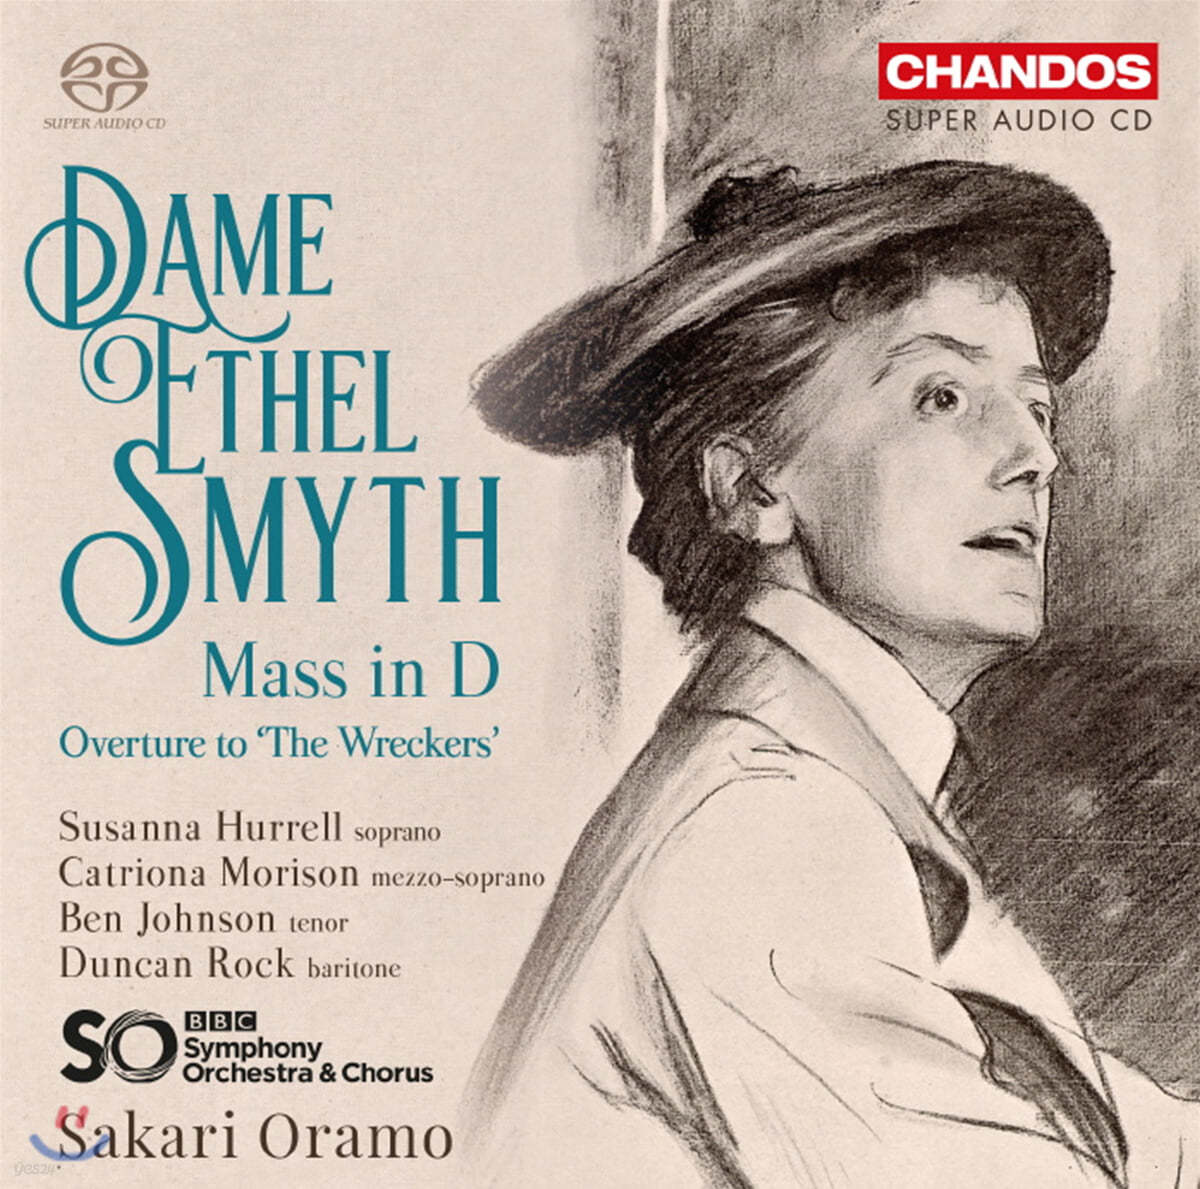 Sakari Oramo 데임 에셀 스마이스: 미사 D, 서곡 (Dame Ethel Smyth: Mass in D &amp; Overture to &#39;The Wreckers&#39;)